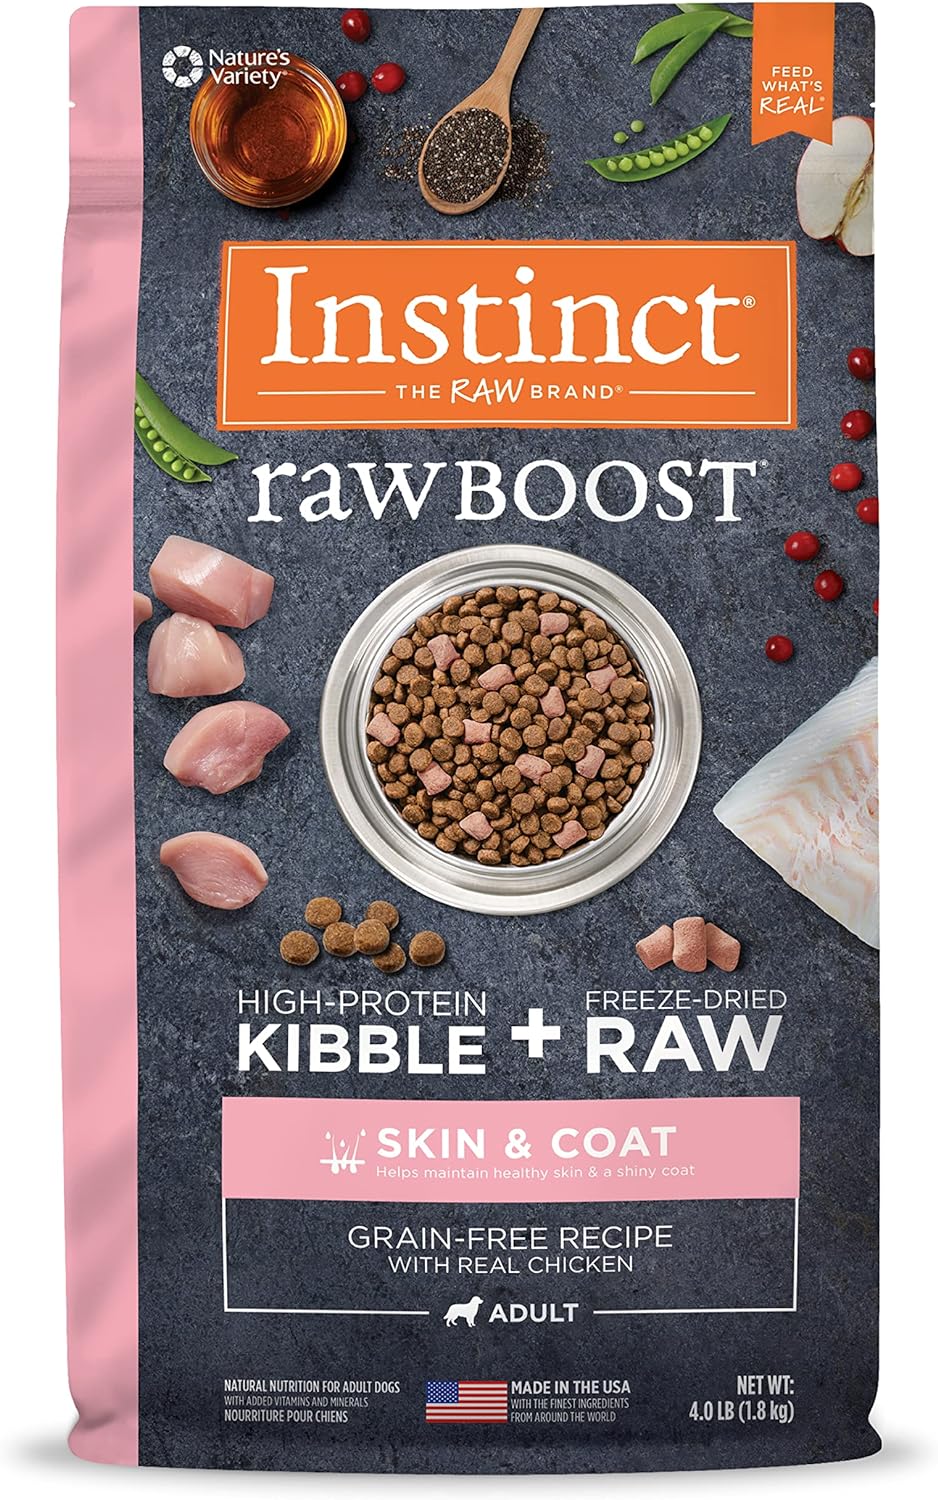 Instinct Raw Boost Grain-Free Recipe with Real Chicken for Skin & Coat Dry Dog Food – Gallery Image 1